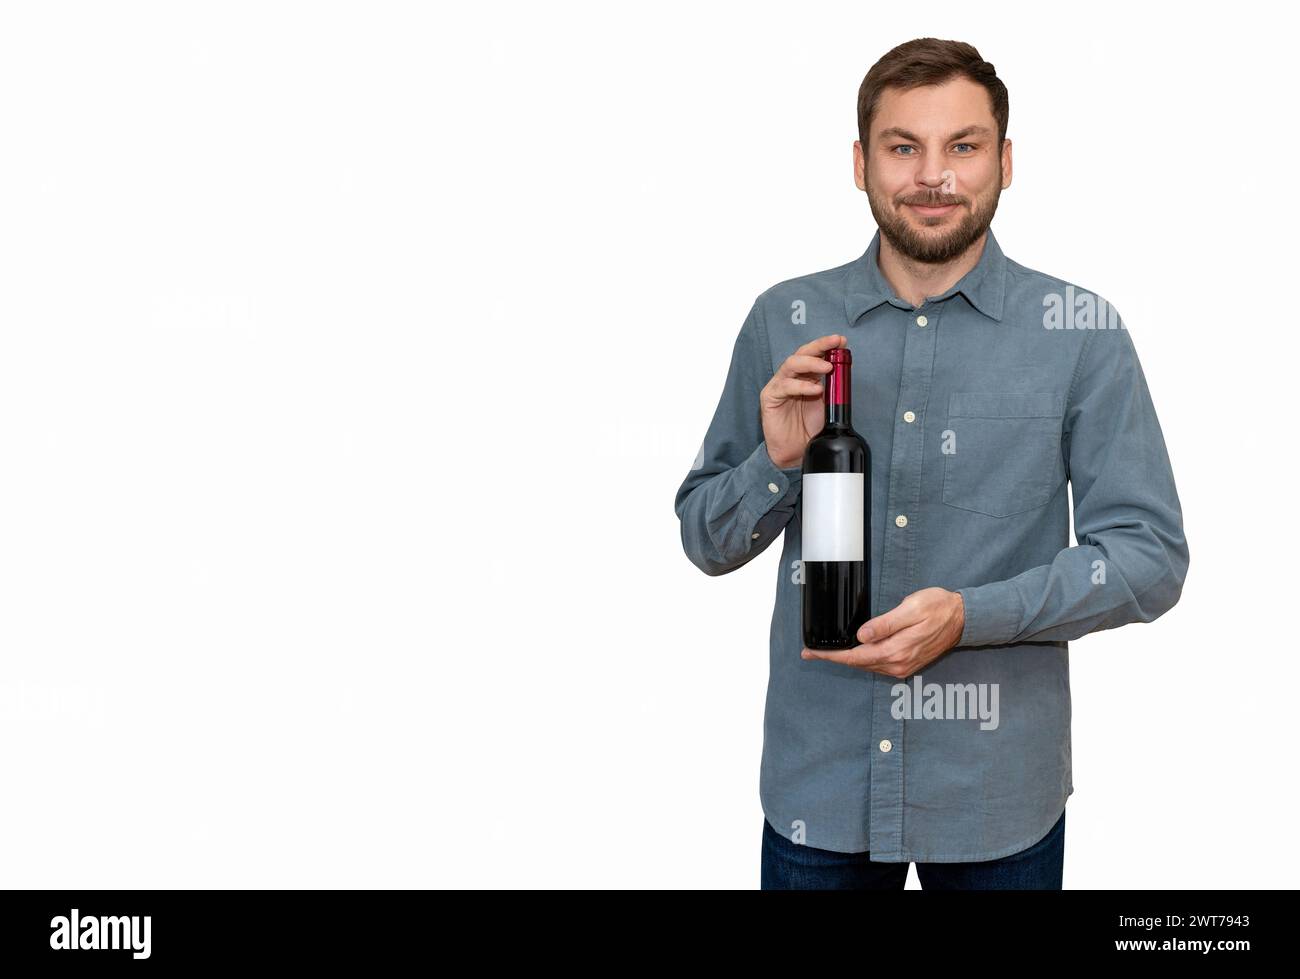 Isolated man customer of liquor store holds wine bottle in his hands and smiles. Stock Photo